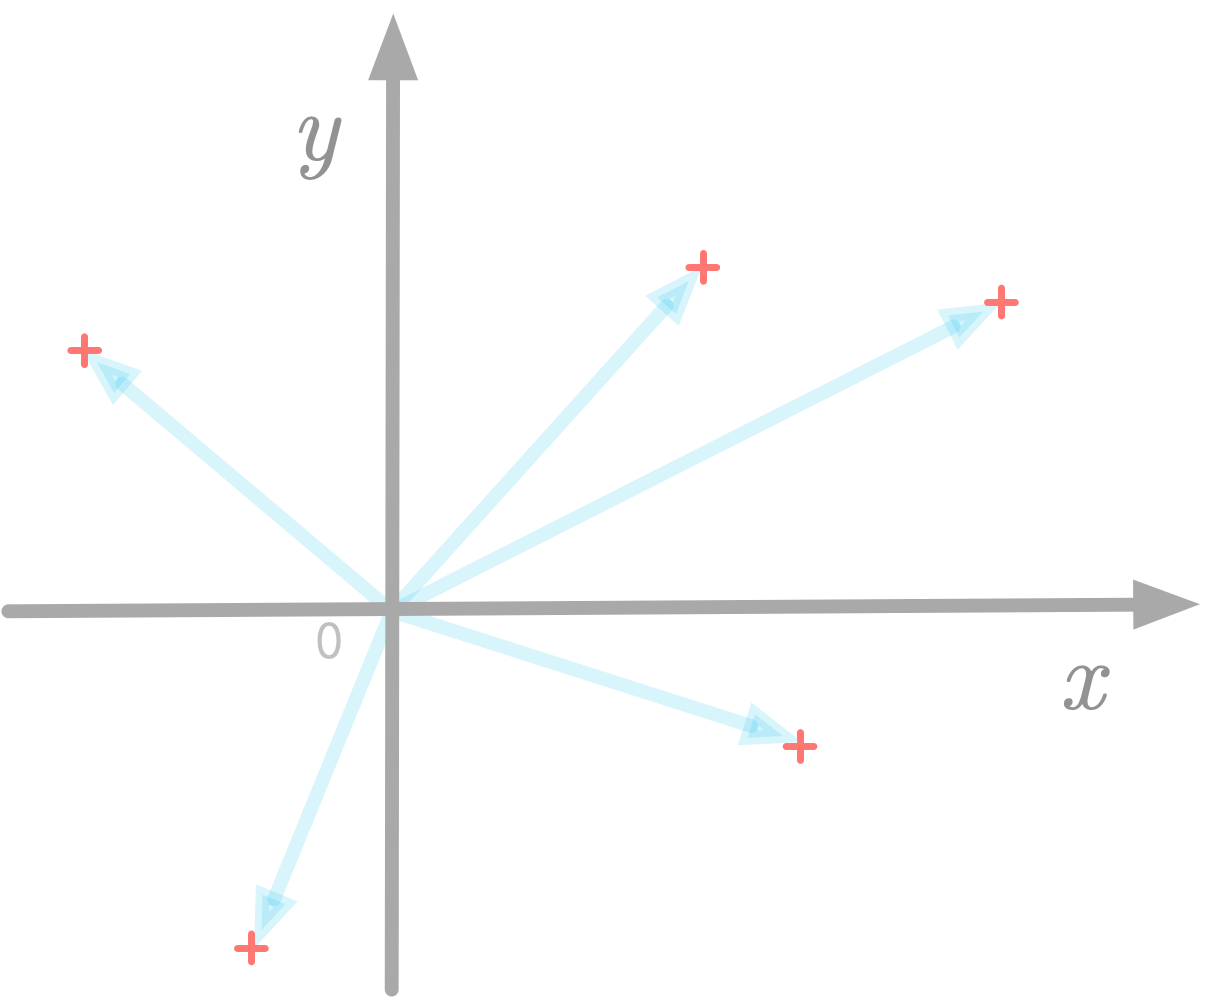 Figure 4: Vectors can be represented as points in the Cartesian plane.